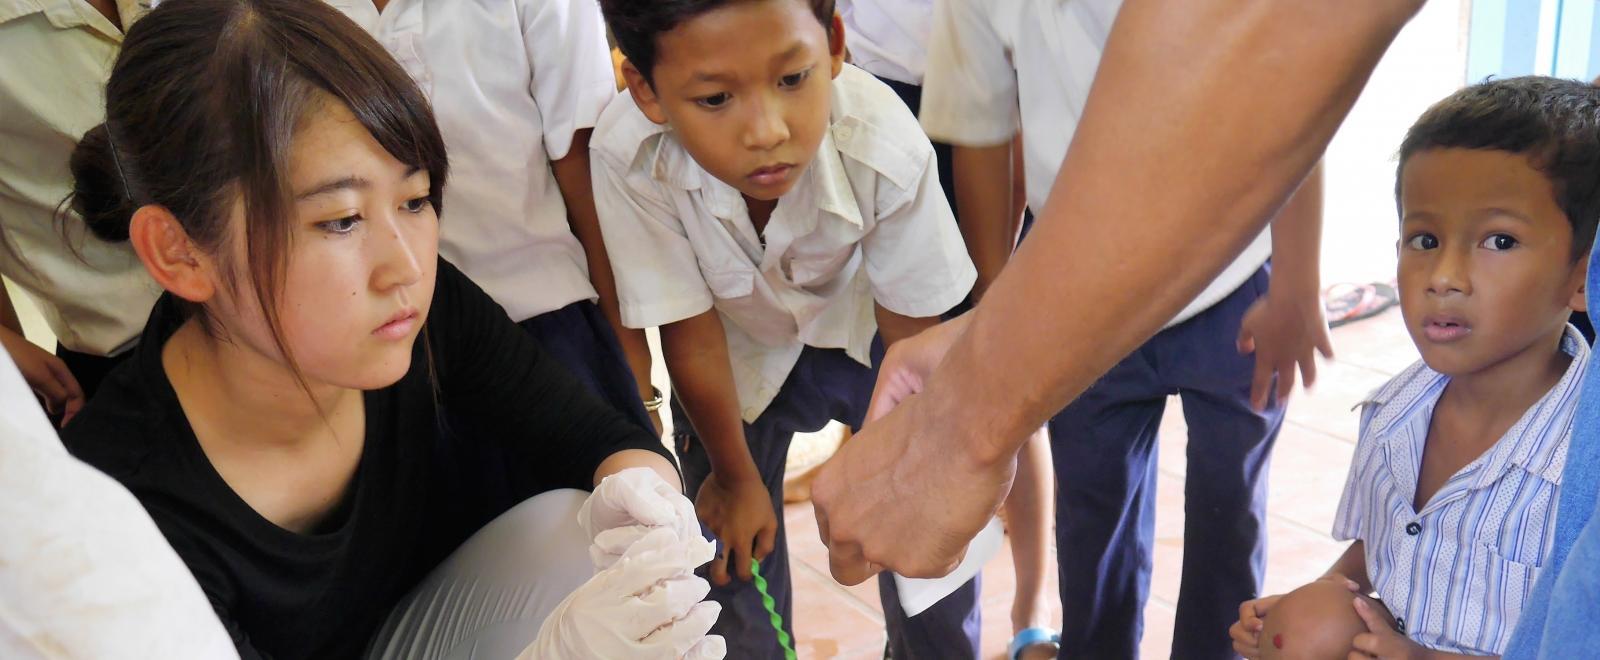 A female intern is pictured taking part in testing blood sugar levels whilst on her public health internship in Cambodia.